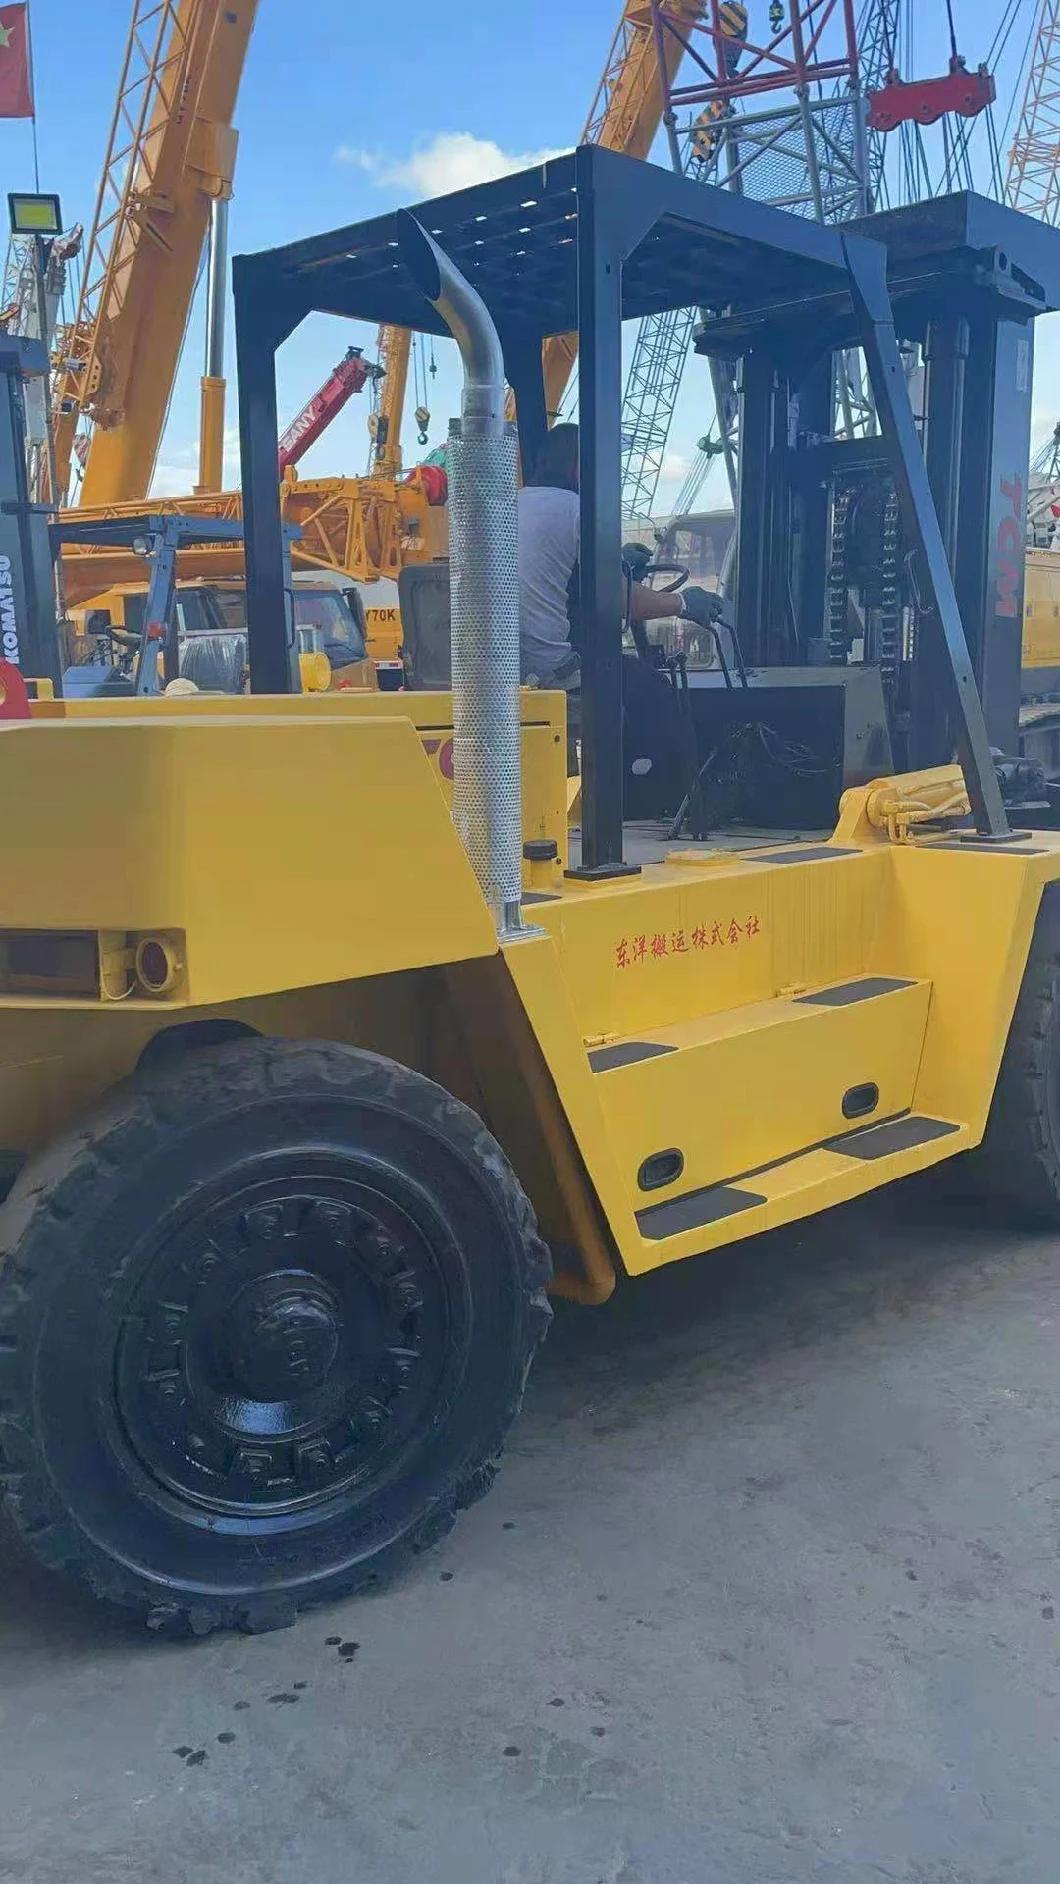 Used Diesel Forklift 15 Ton Tcm/ Komatsu Forklift with Side Shift Cheap Price for Sale